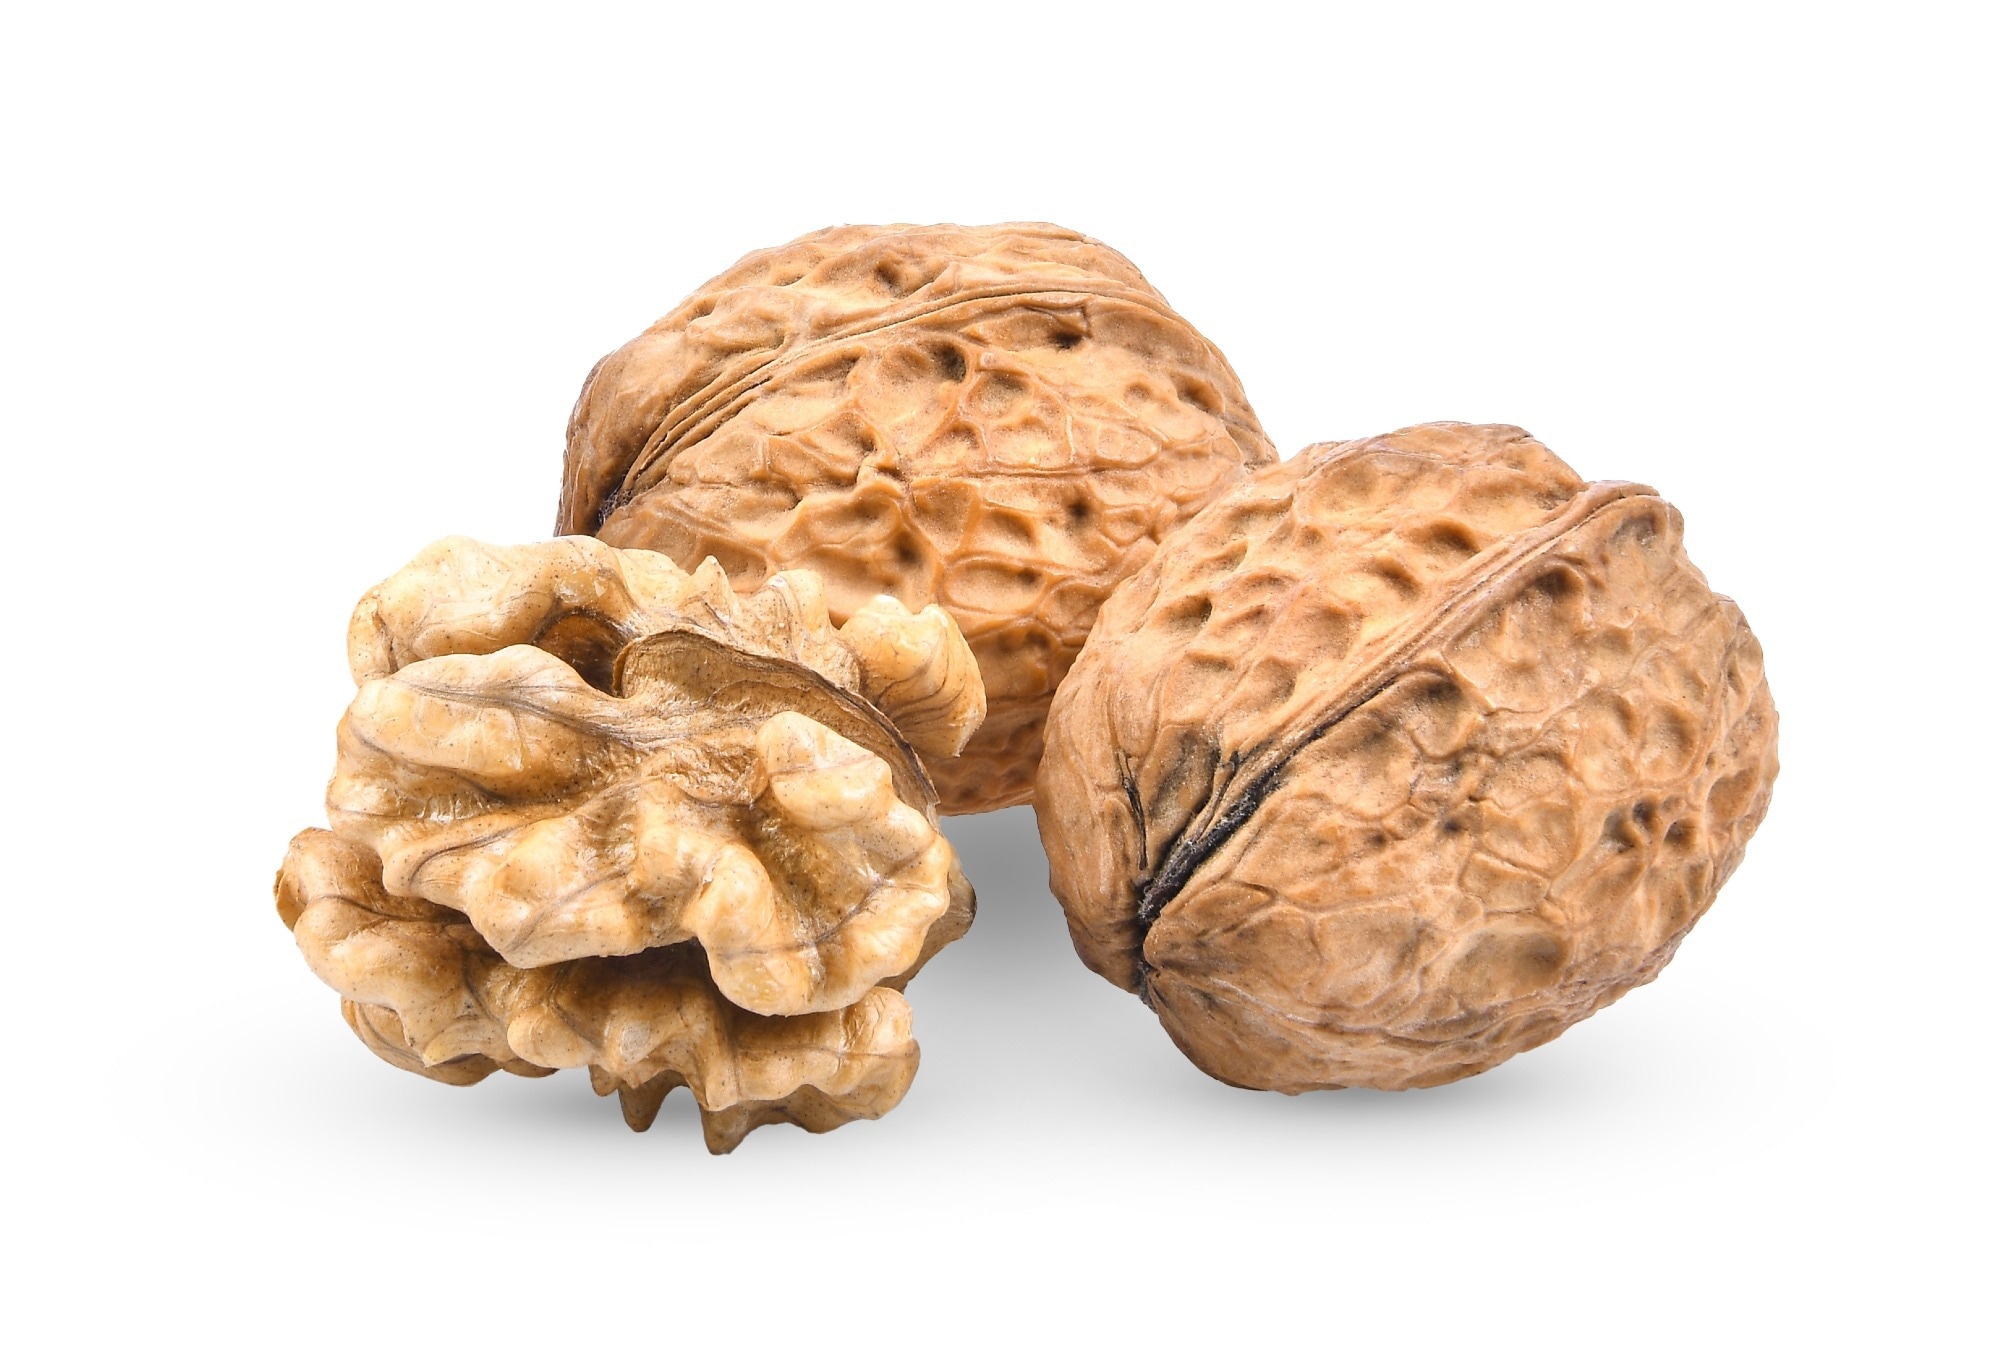 Study: Antioxidant and Anti-Inflammatory Properties of Walnut Constituents: Focus on Personalized Cancer Prevention and the Microbiome. Image Credit: SOMMAI/Shutterstock.com